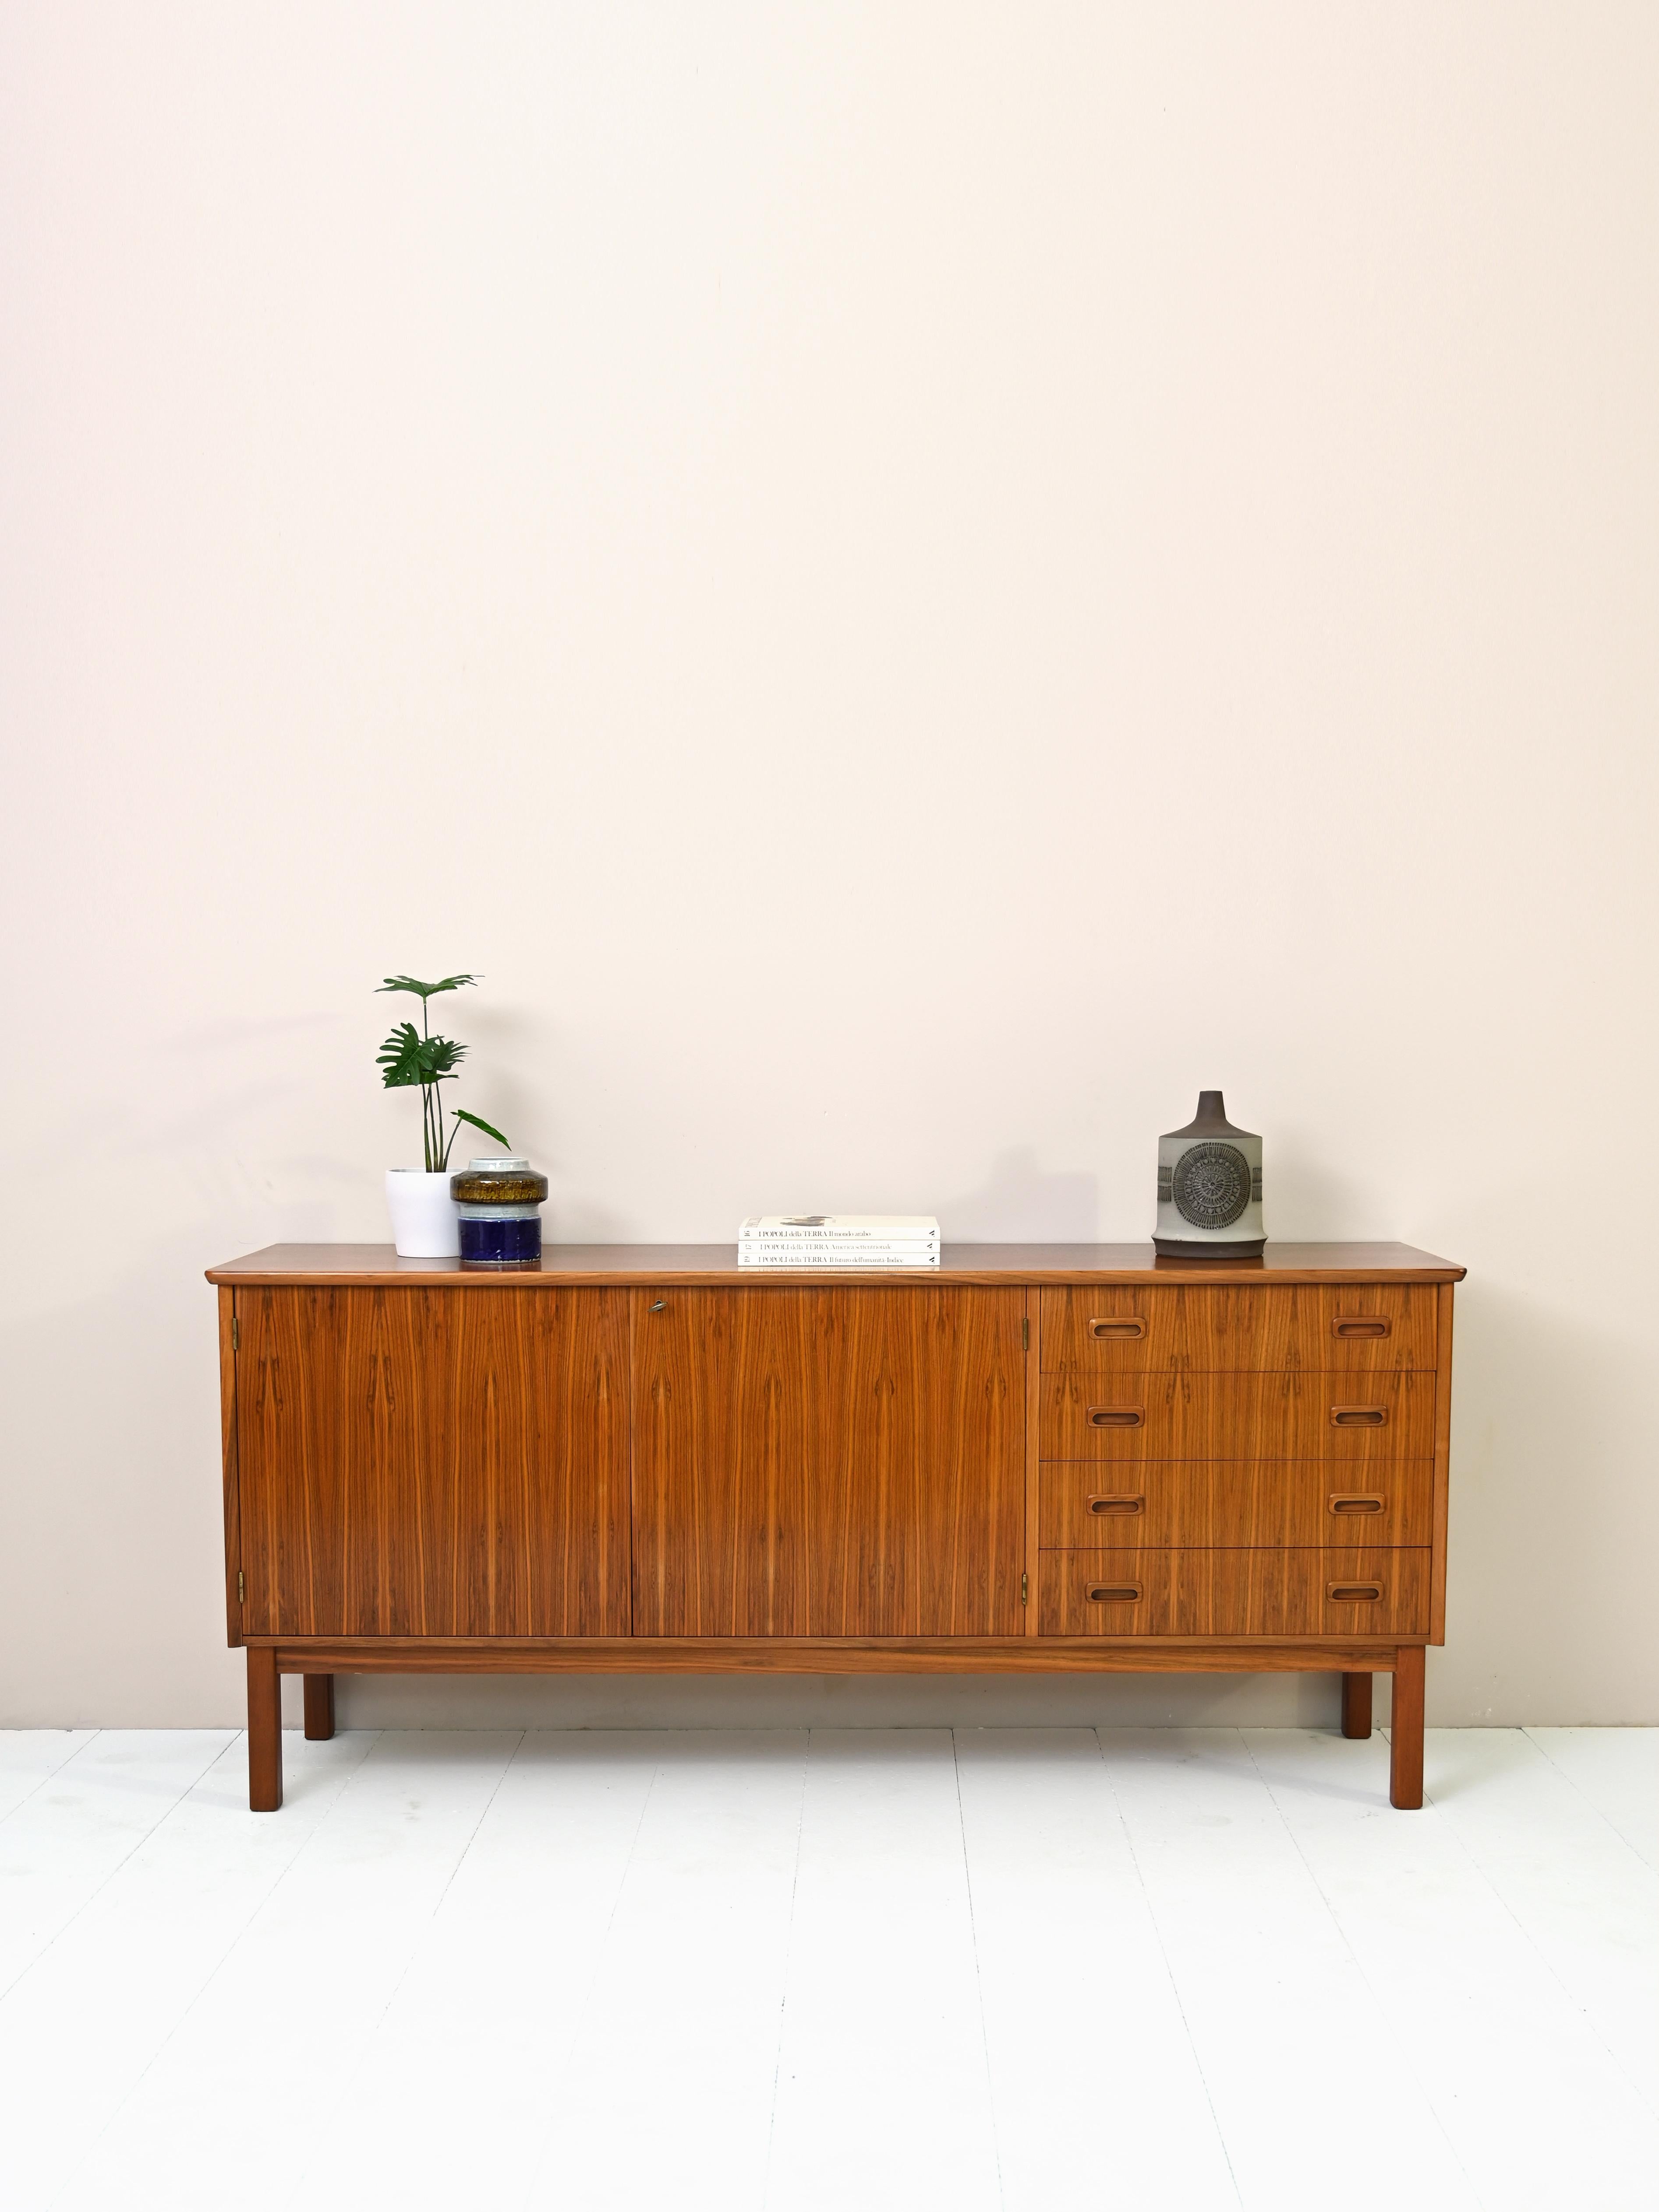 Sideboard cabinet of Scandinavian manufacture from the 1960s.

This teak wood sideboard features a simple, linear shape. The two hinged doors
conceal a large storage compartment equipped with shelving.
Attention to detail is evident in the